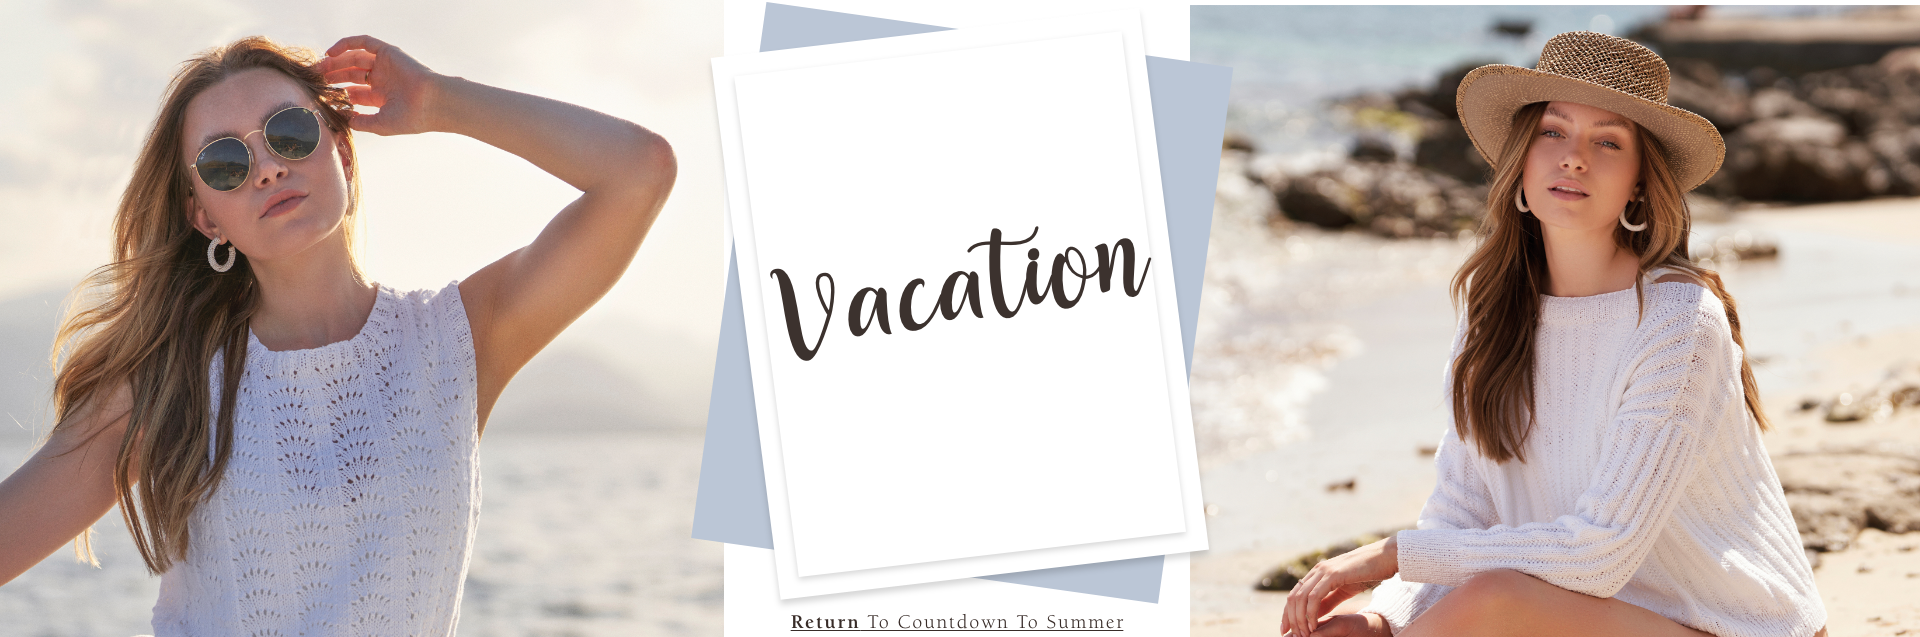 Vacation banner